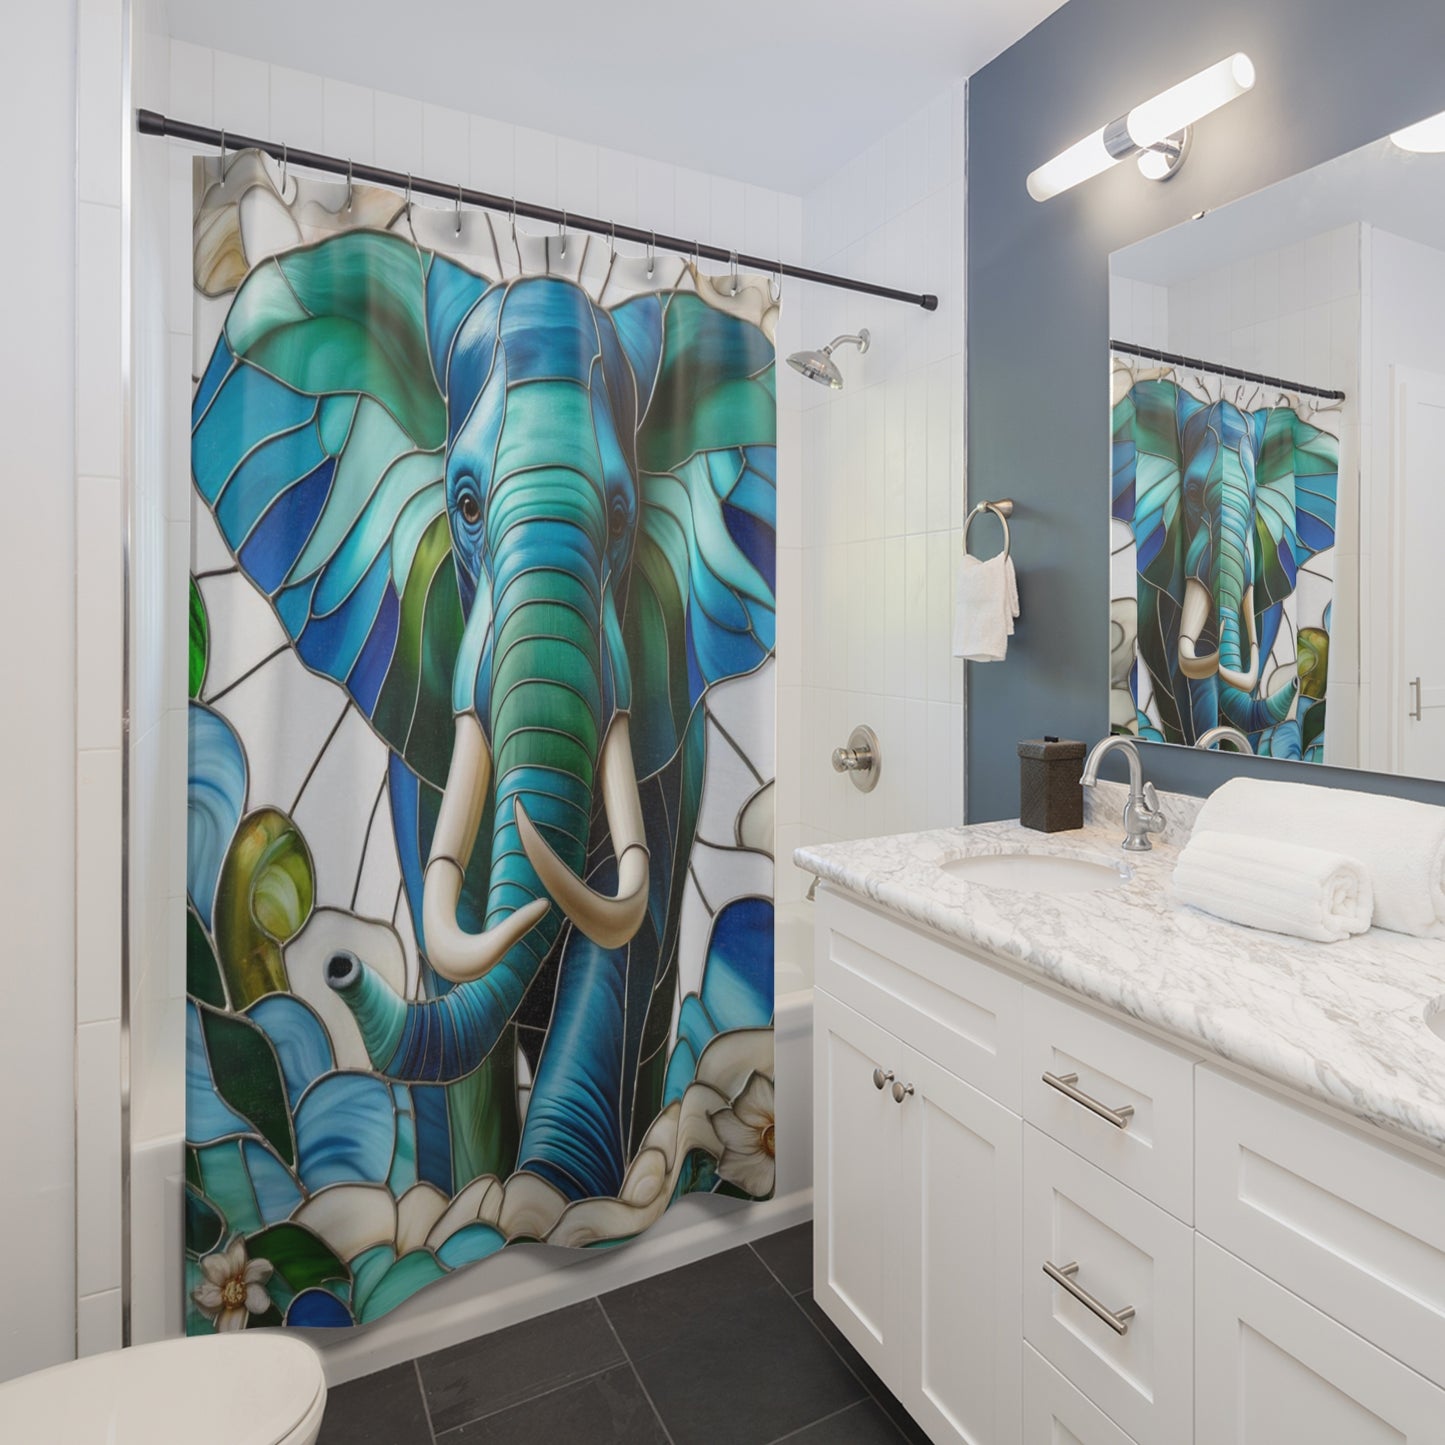 Stained Glass Elephant Shower Curtain